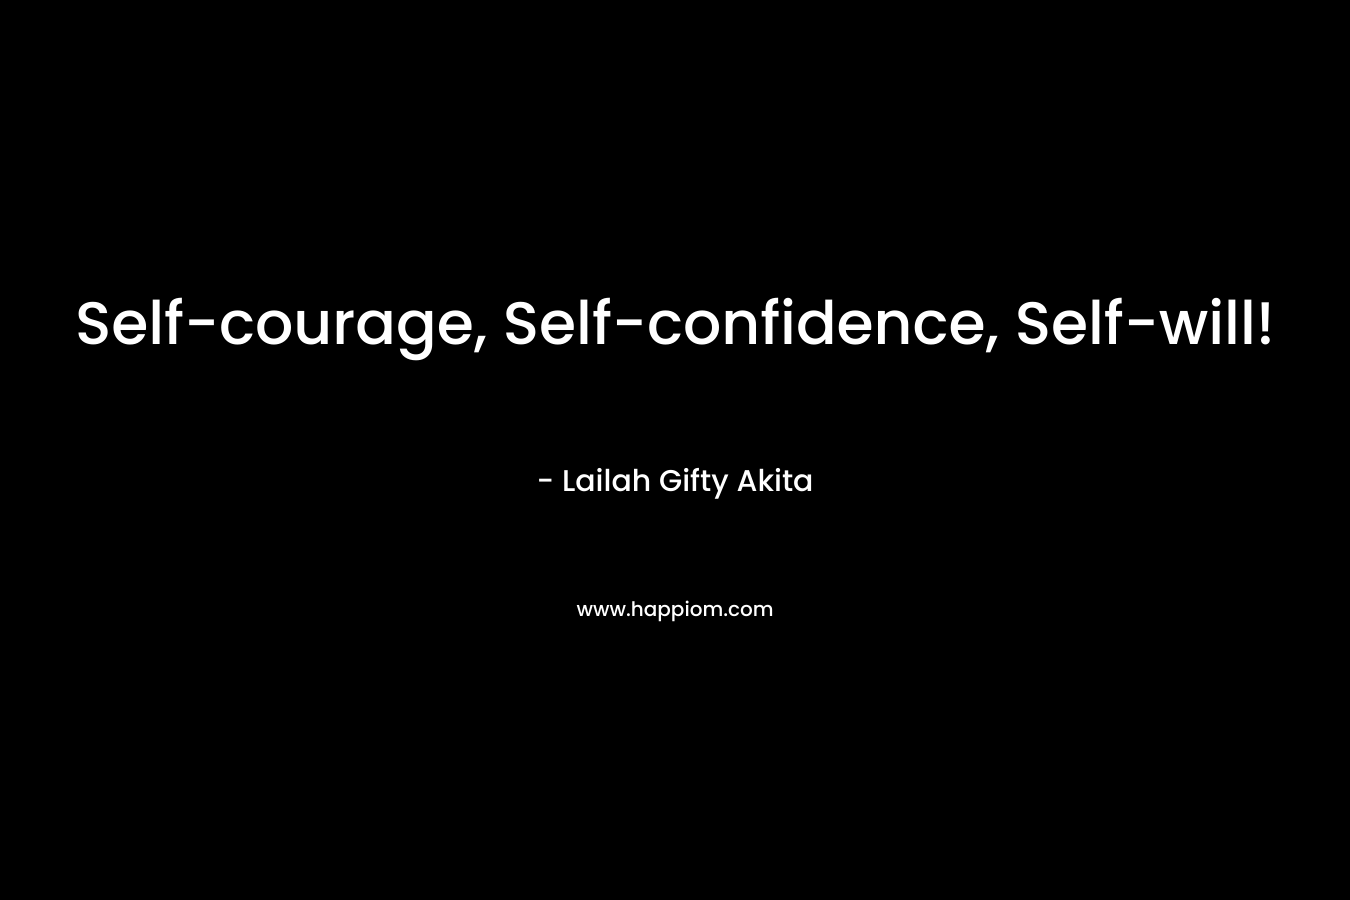 Self-courage, Self-confidence, Self-will!